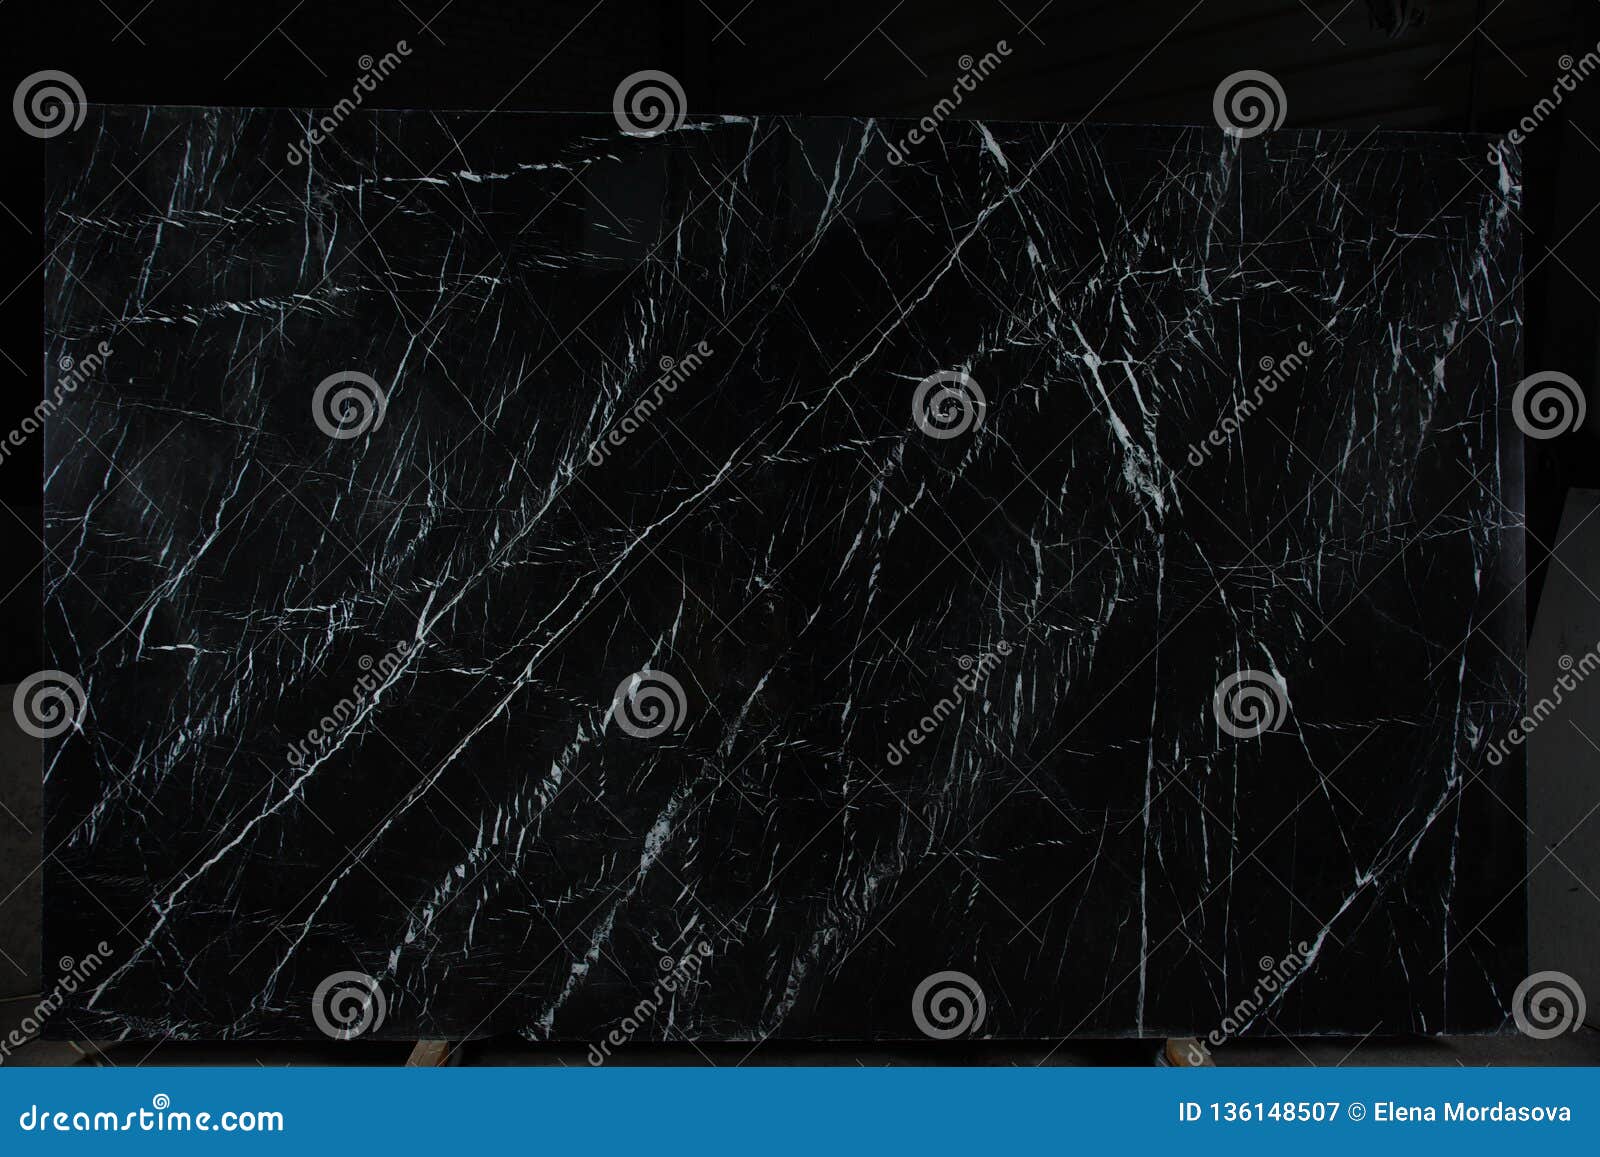 natural stone is black marble with an interesting pattern called nero marquina